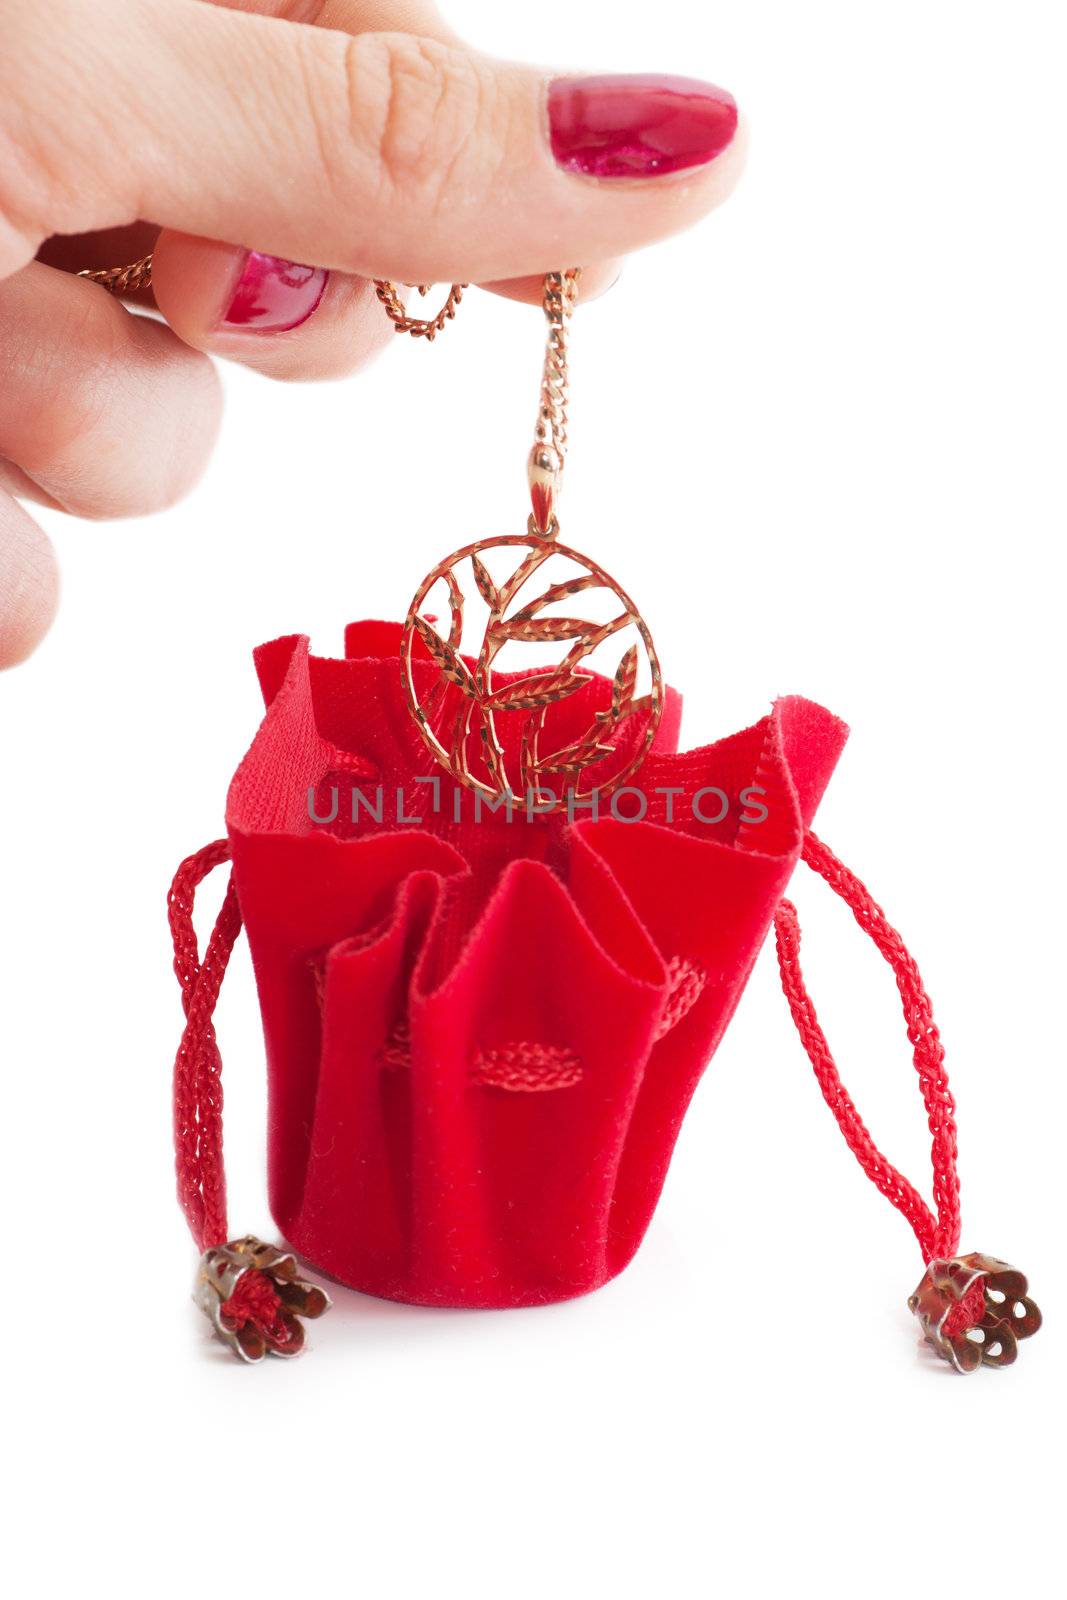 A female hand put golden chain into little red bag isolated over white